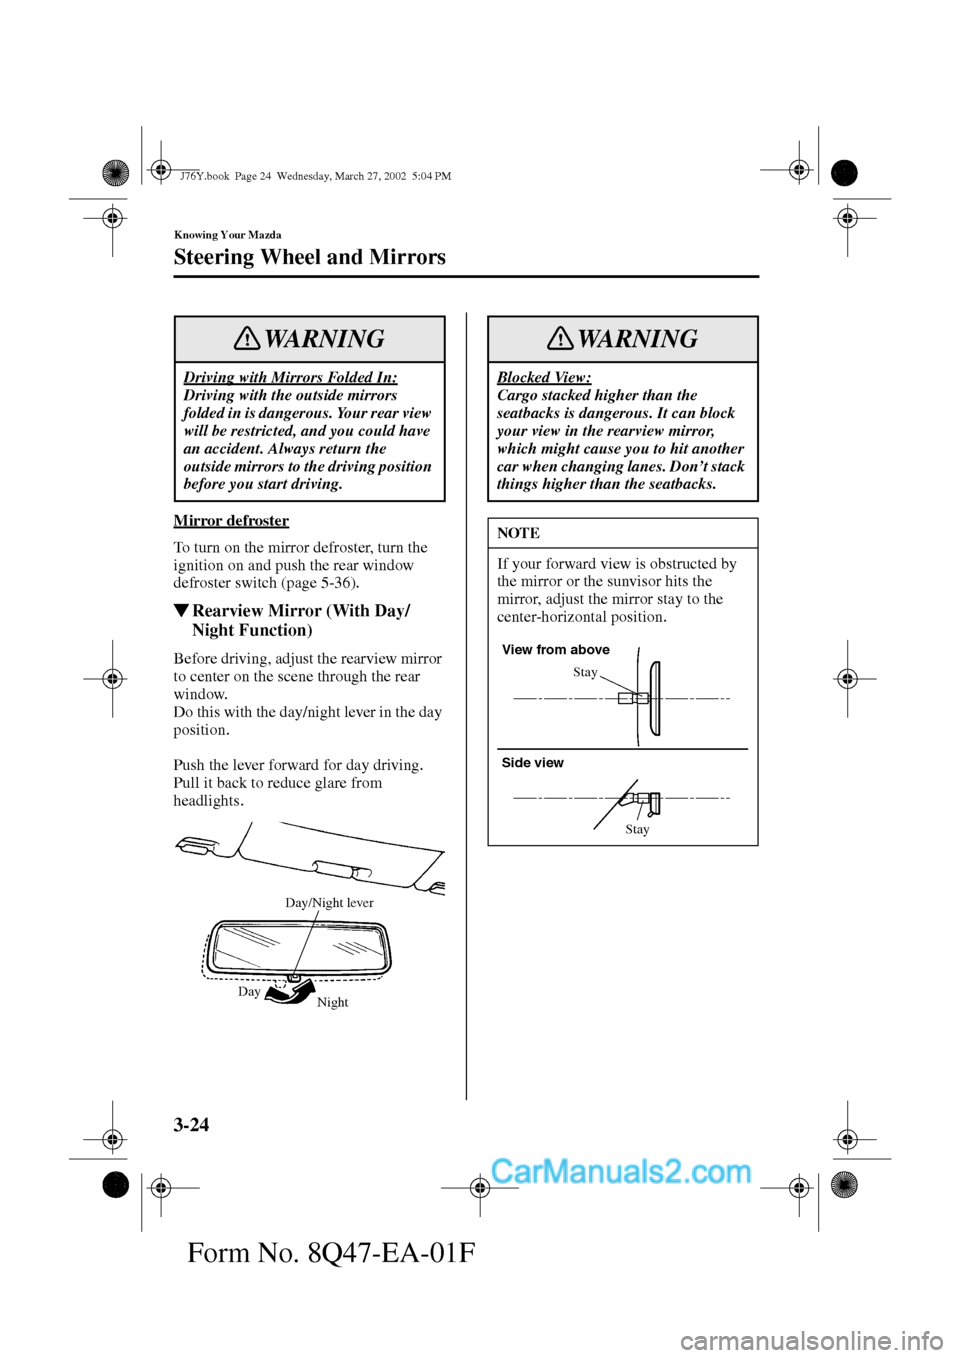 MAZDA MODEL MILLENIA 2002  Owners Manual (in English) 3-24
Knowing Your Mazda
Steering Wheel and Mirrors
Form No. 8Q47-EA-01F
Mirror defroster
To turn on the mirror defroster, turn the 
ignition on and push the rear window 
defroster switch (page 5-36).
